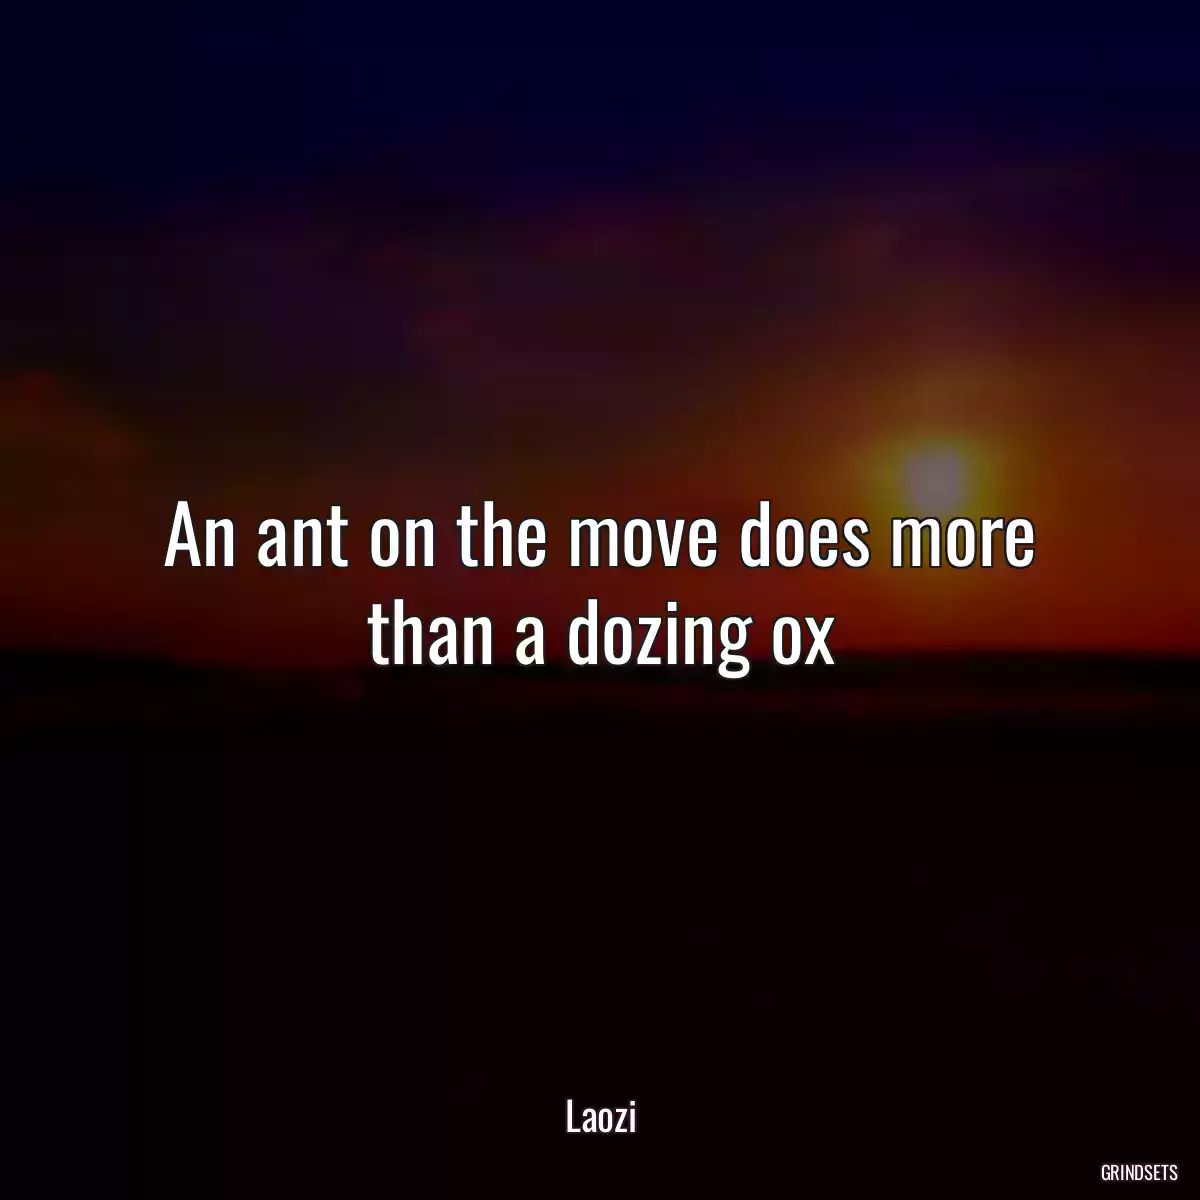 An ant on the move does more than a dozing ox